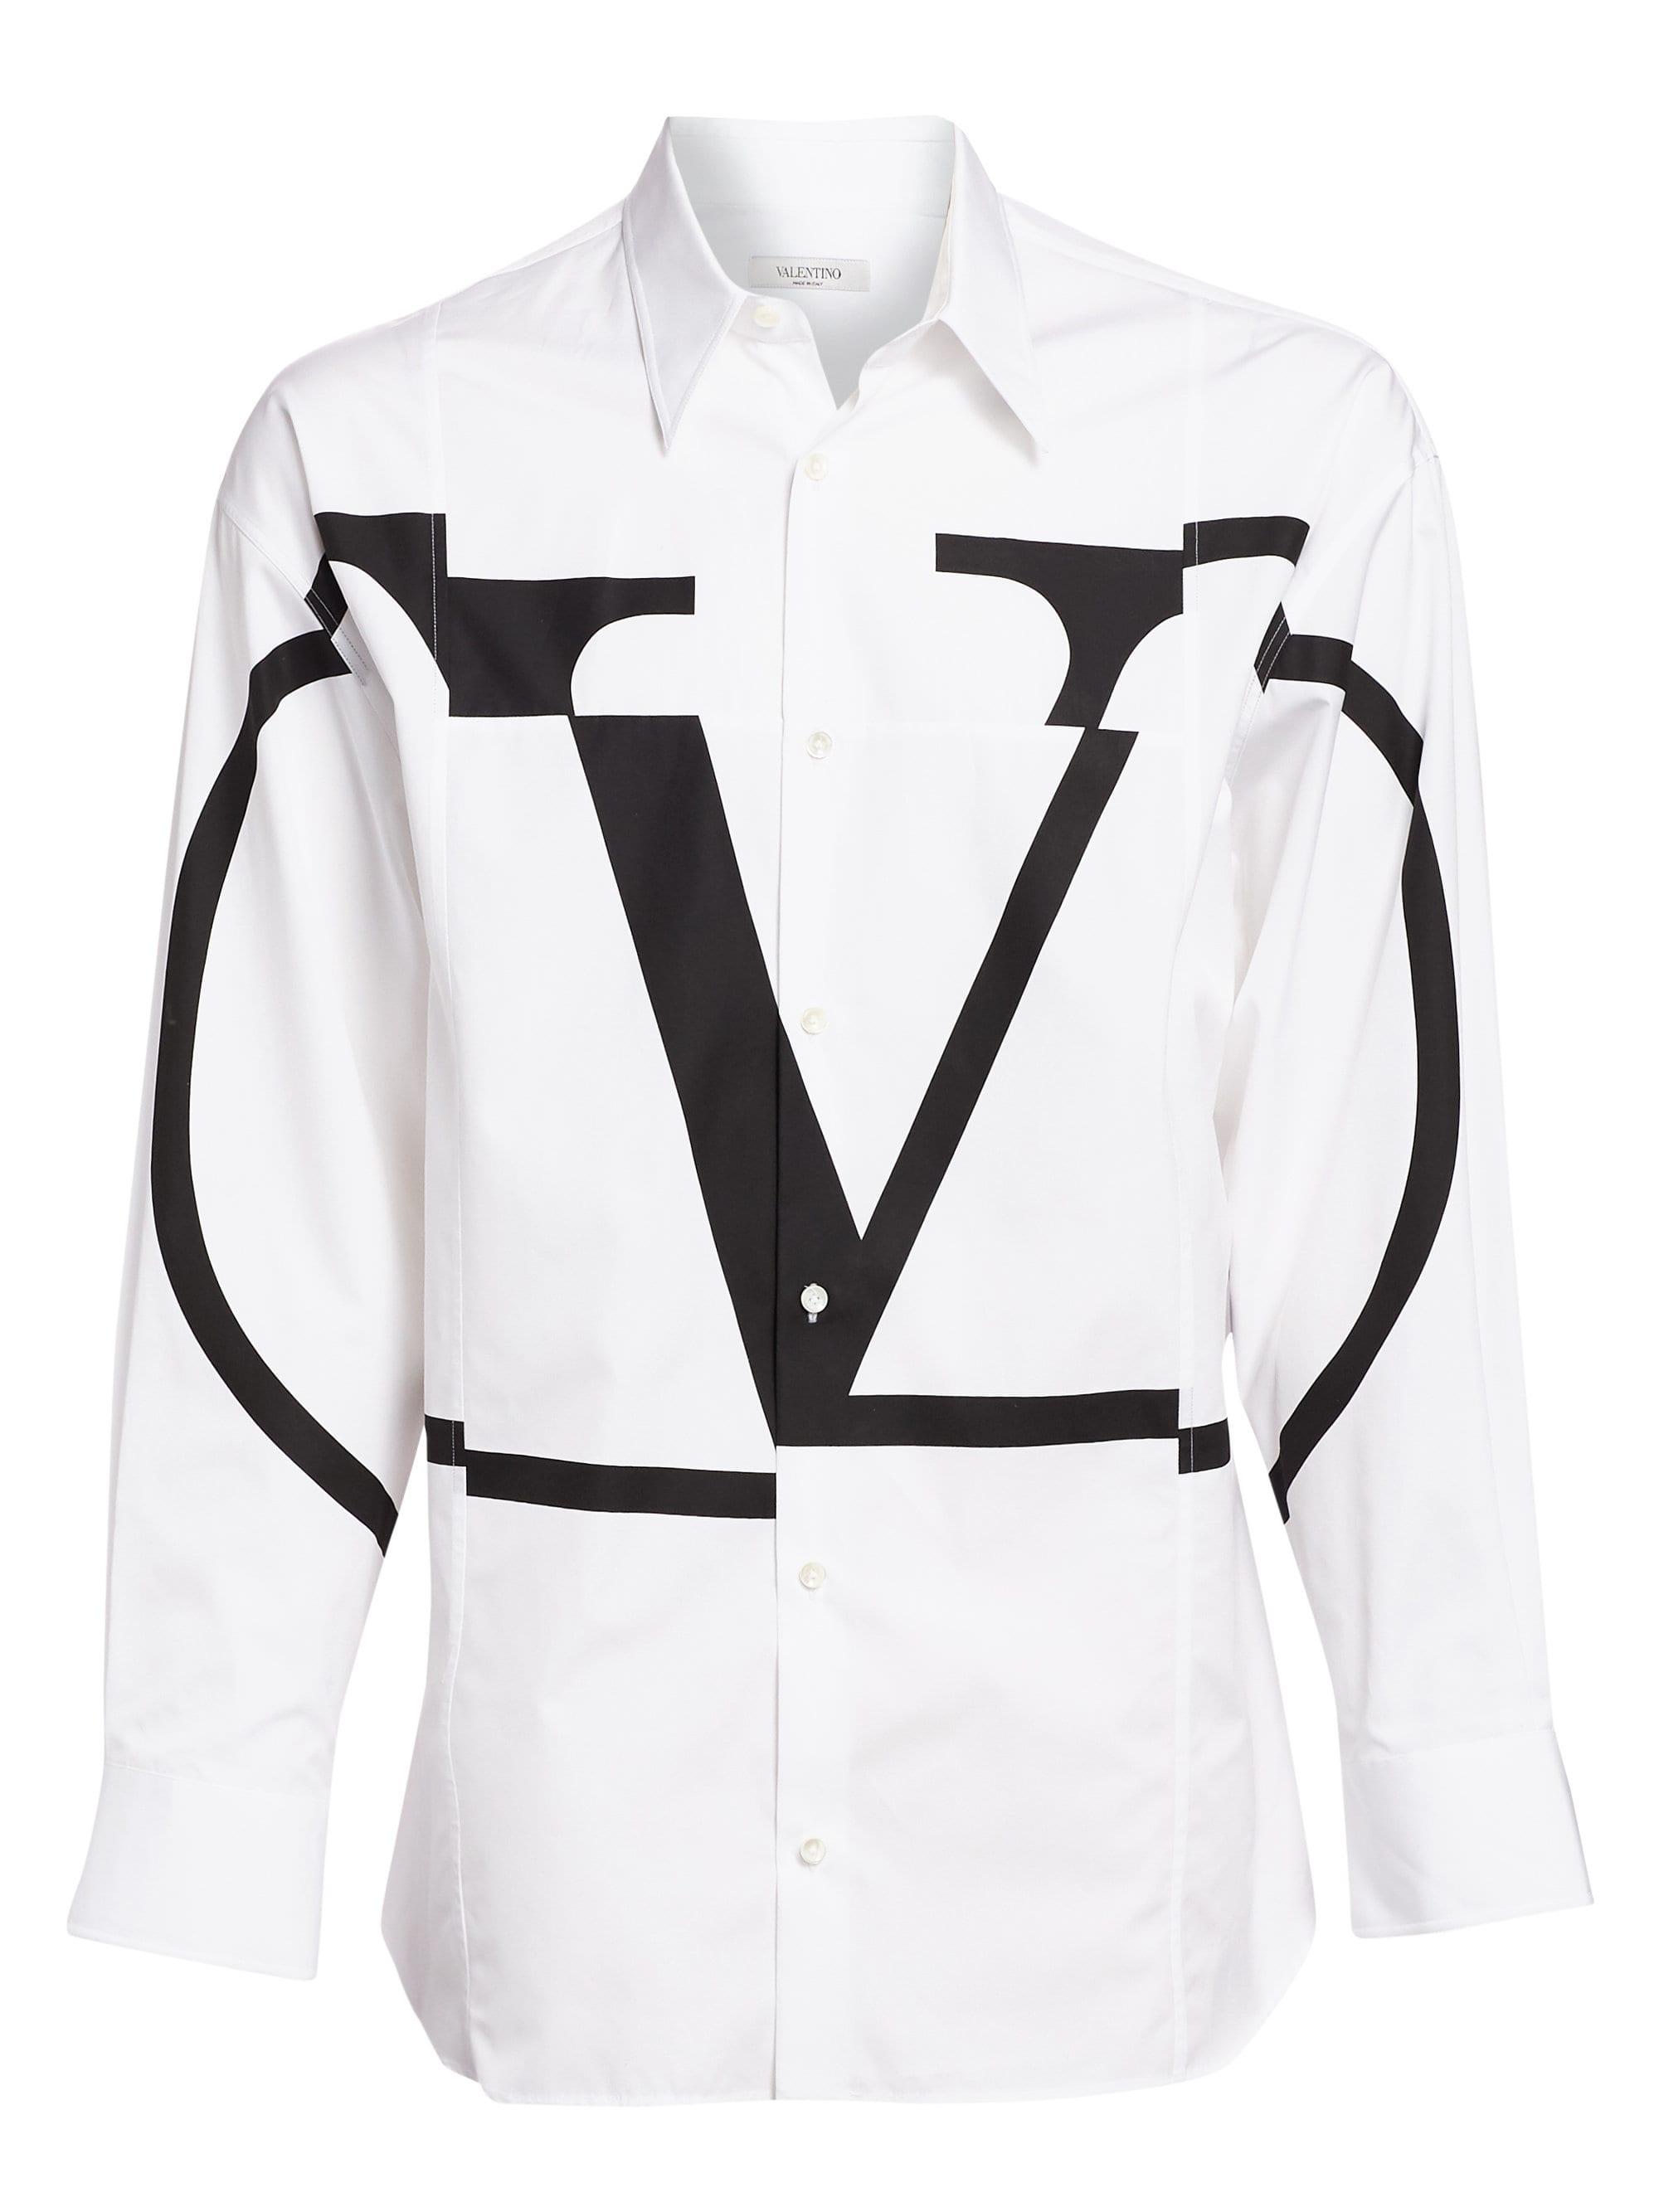 Valentino Cotton Long-sleeve Cotton Shirt in White for Men - Save 65%